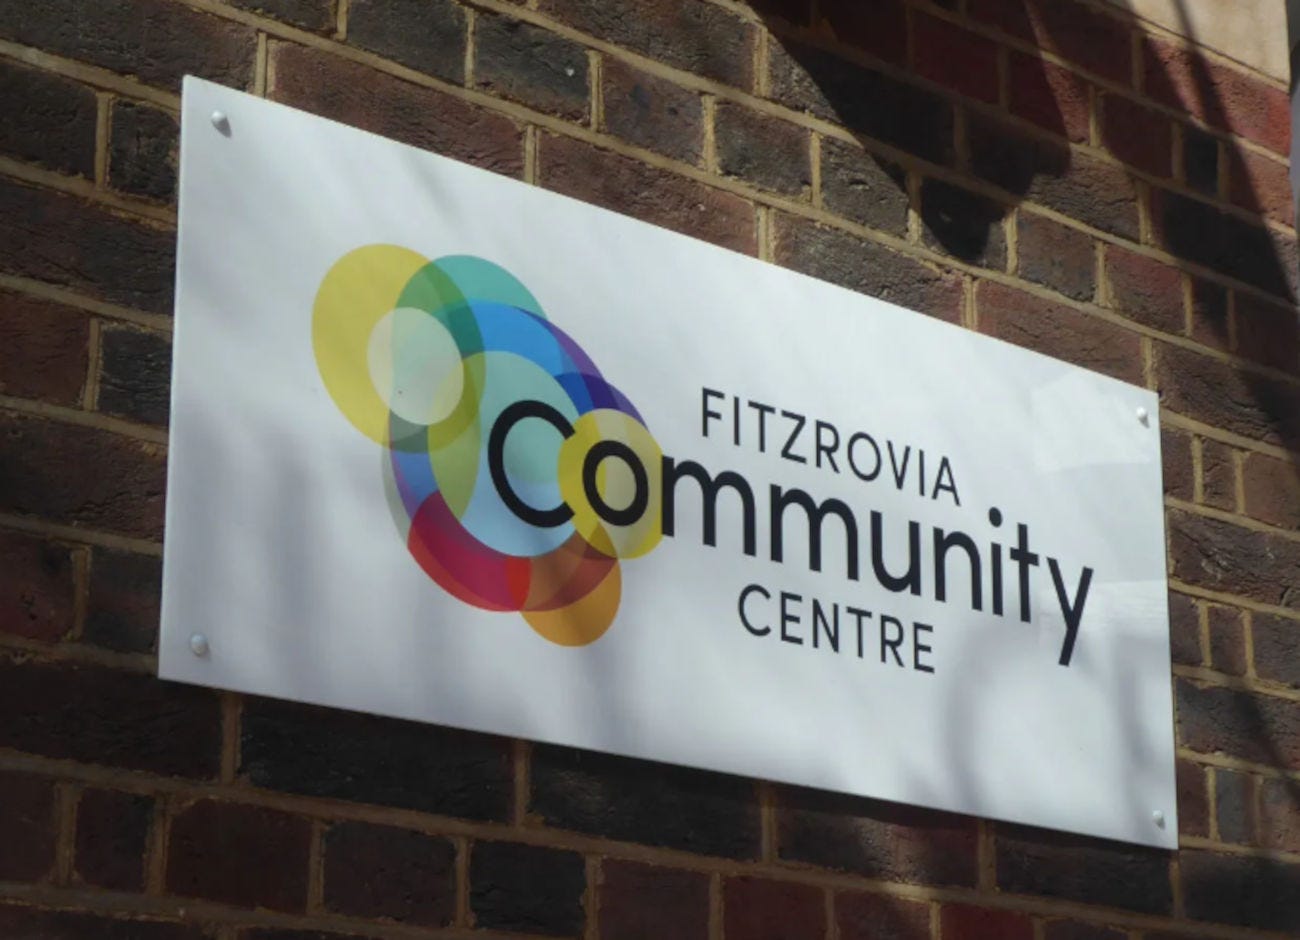 Sign on wall says Fitzrovia Community Centre.